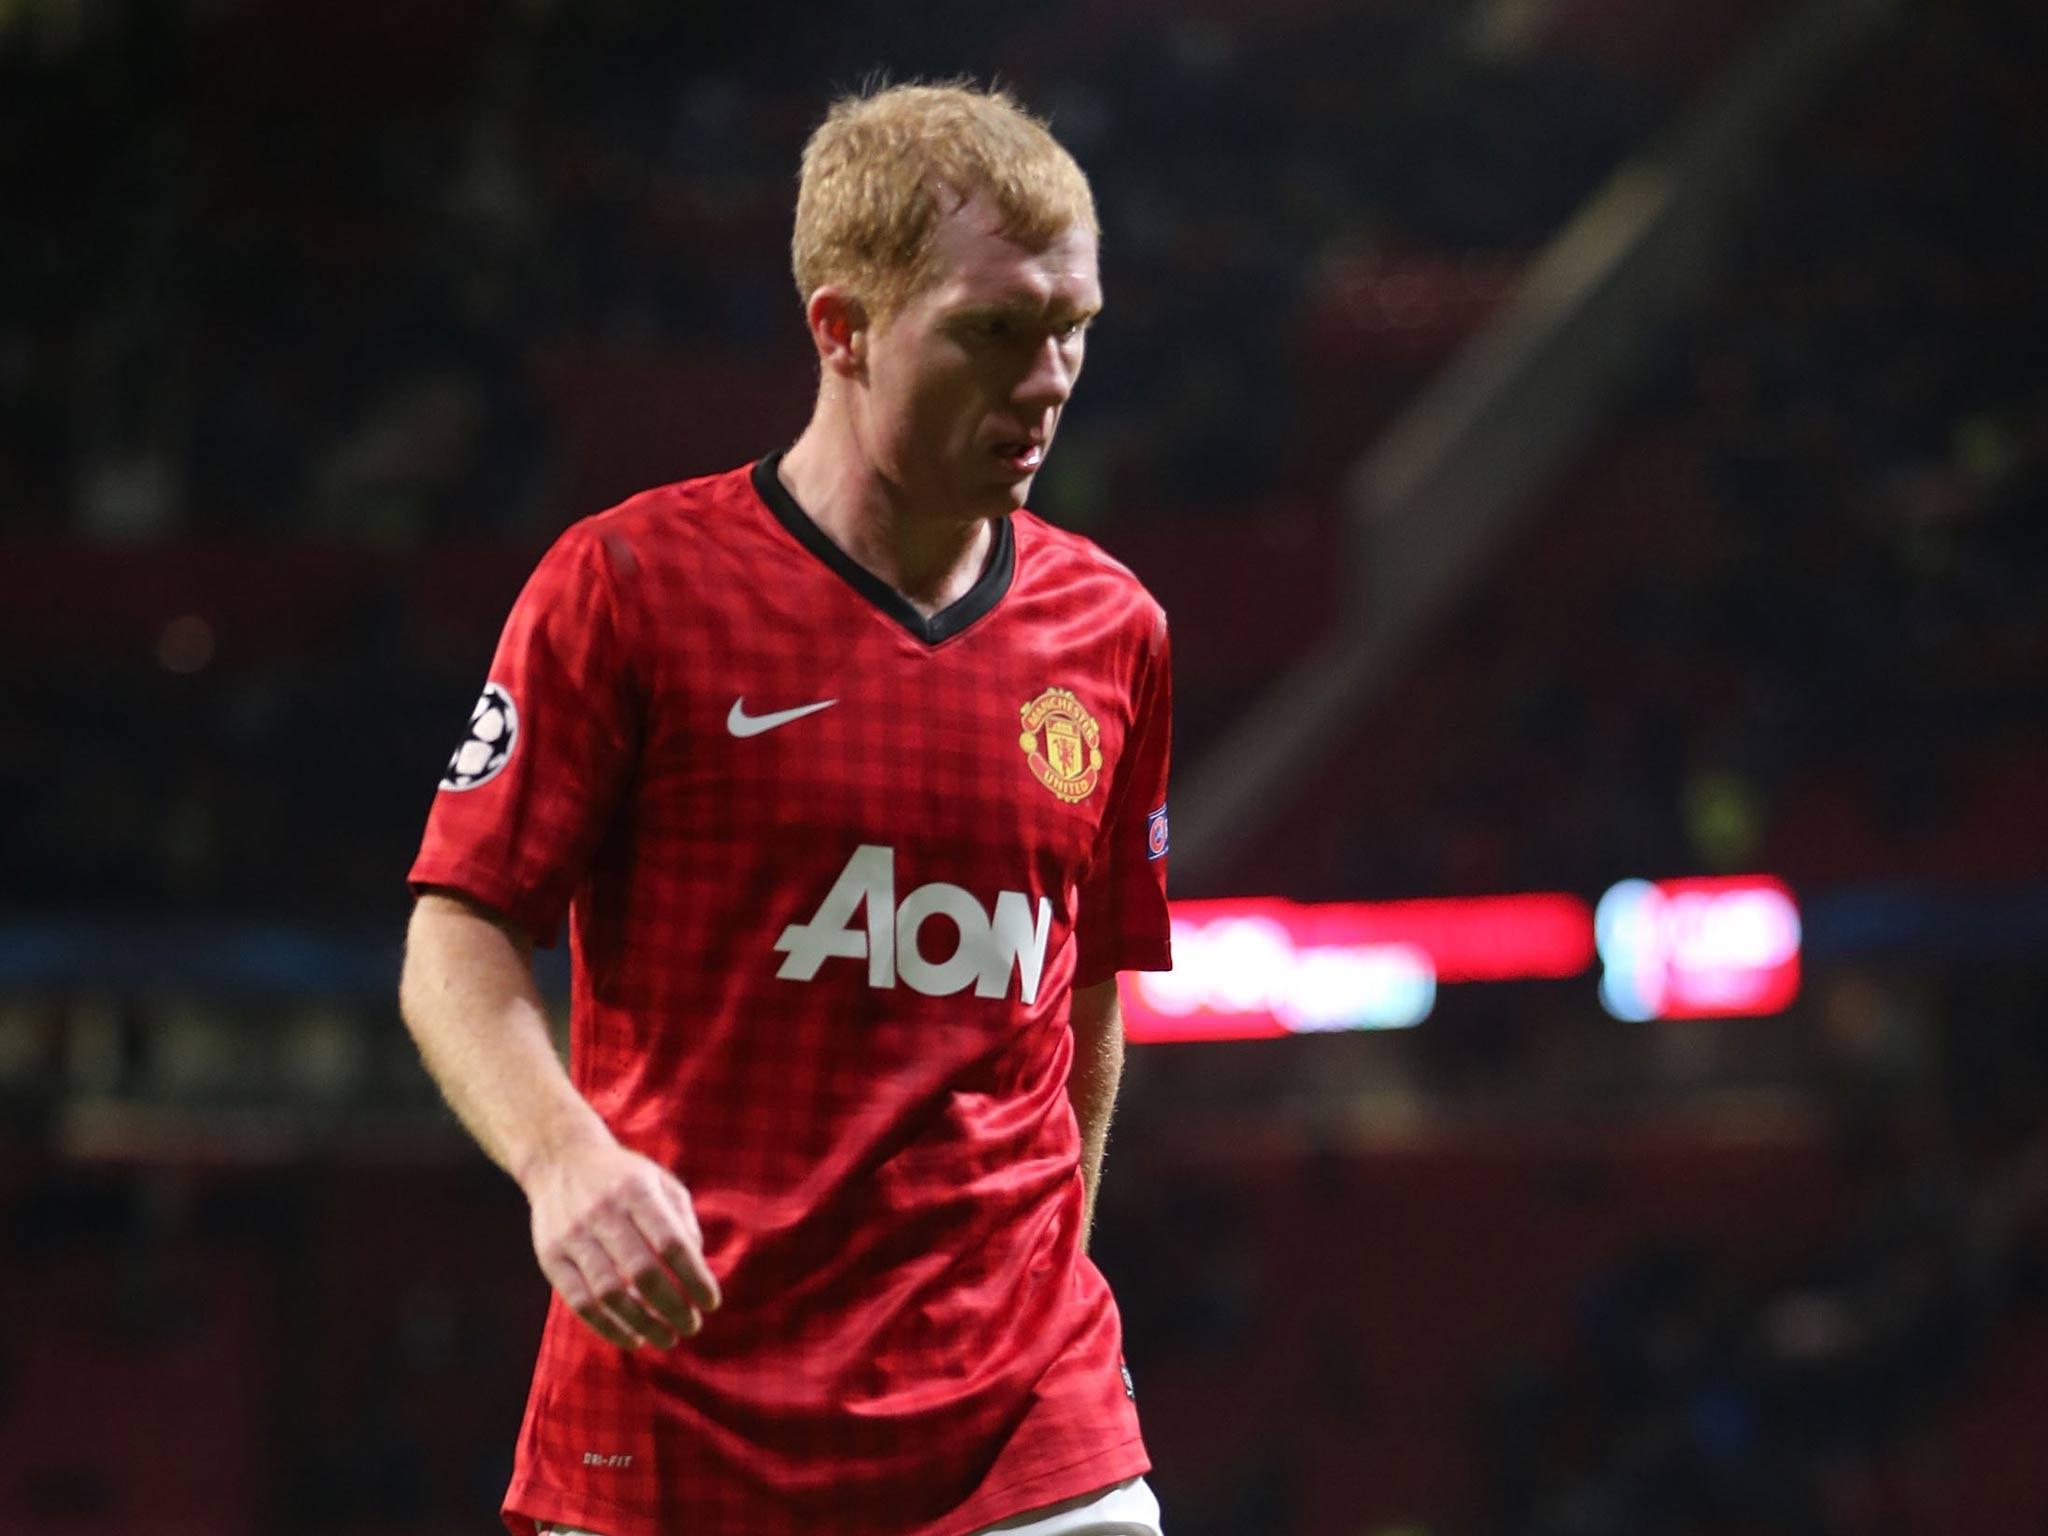 Paul Scholes: Manchester United great unleashes attack on